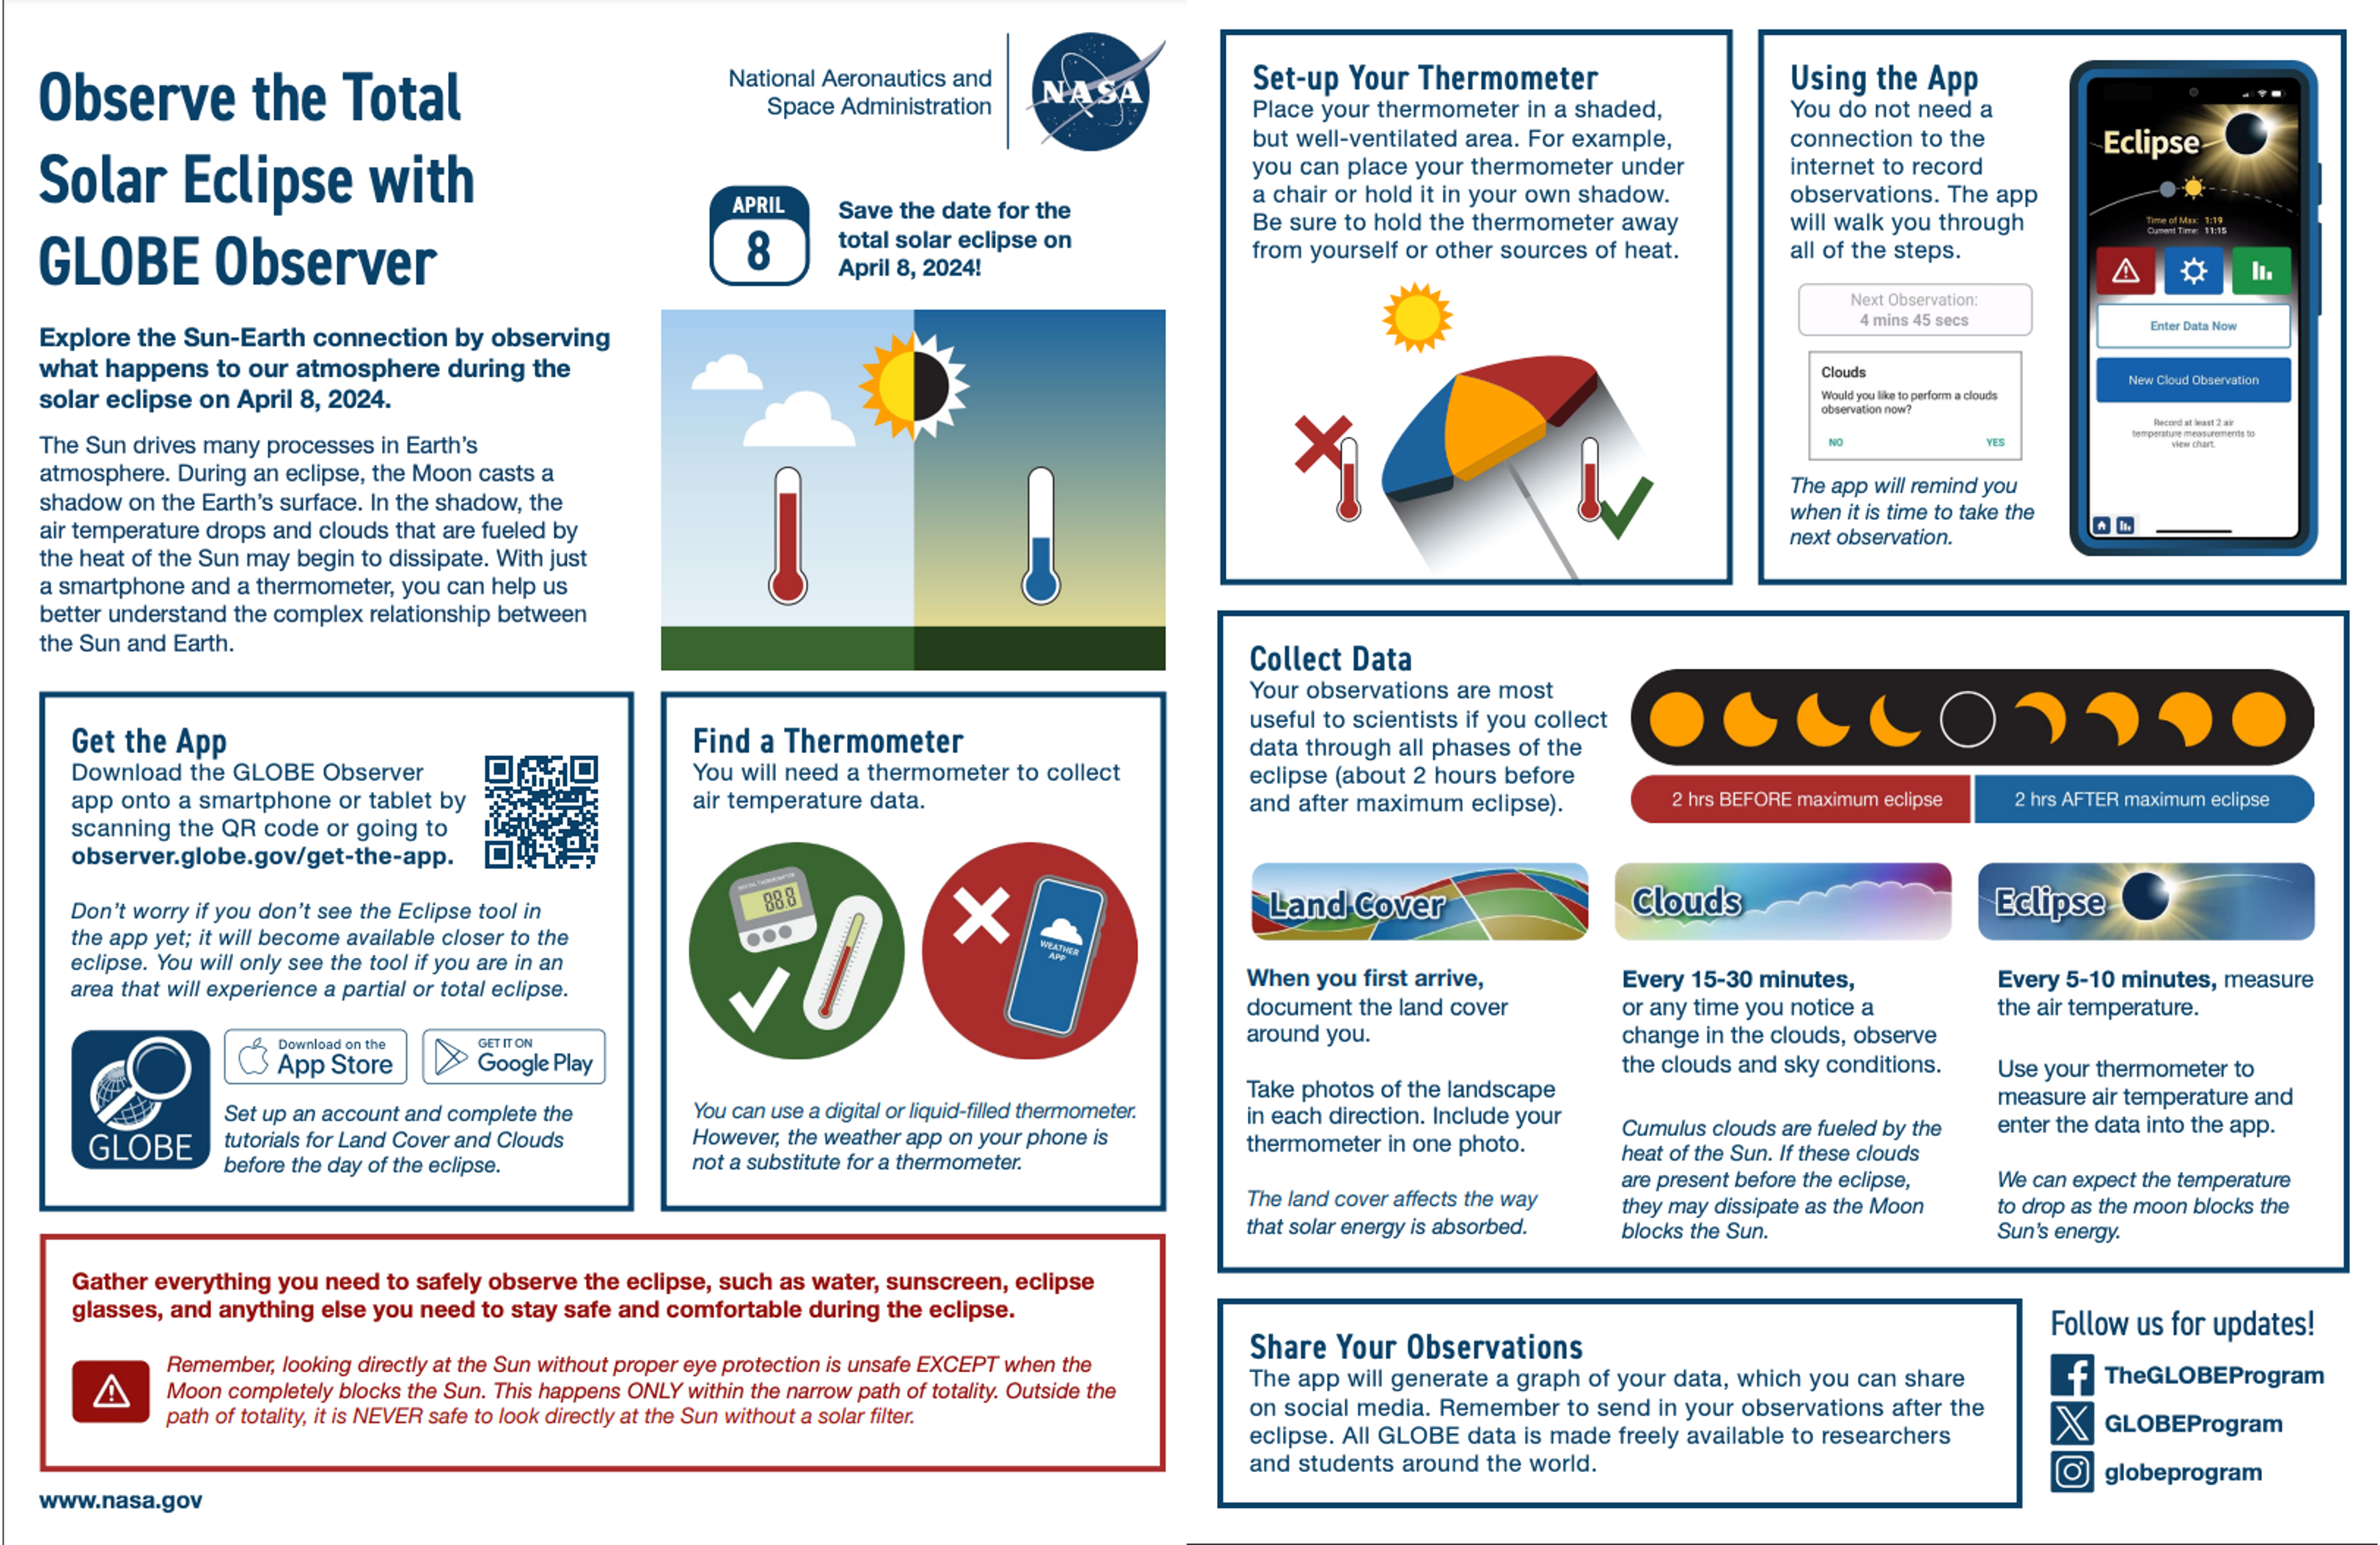 Screenshots of a two-page overview handout about how to observe the total solar eclipse with GLOBE Observer. Sections include: get the app, find a thermometer, set up your thermometer, using the app, collect data, and share your observations. The full handout is available in an accessible format at https://observer.globe.gov/documents/19589576/51589943/GLOBE-Eclipse_Overview_English.pdf. 